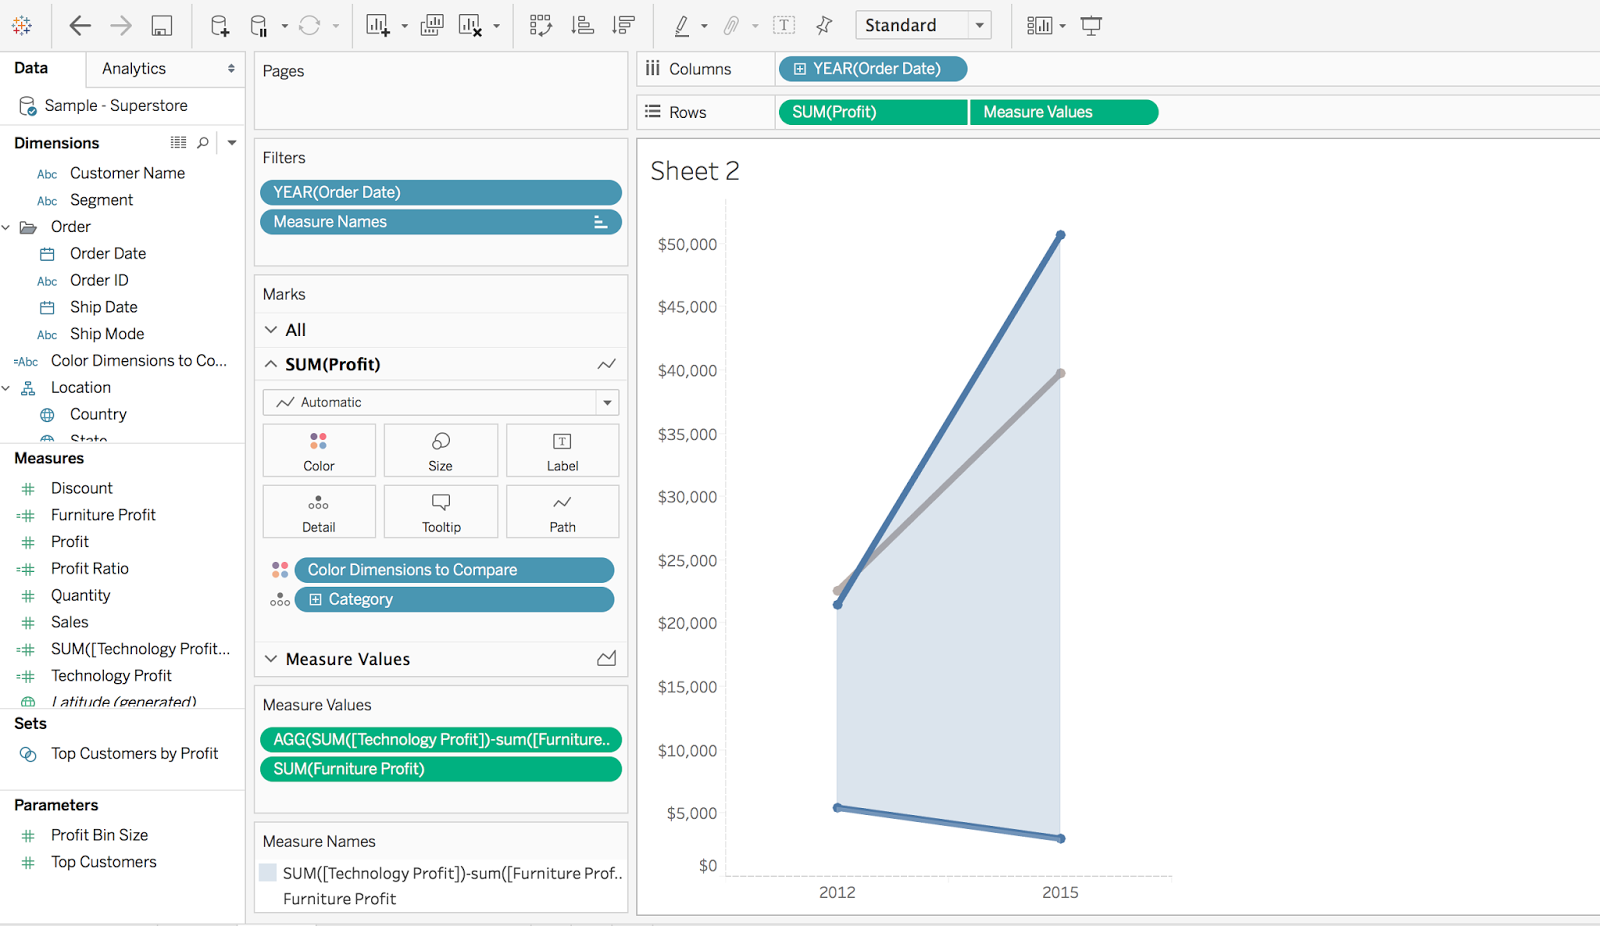 how to create a shaded slope chart in Tableau